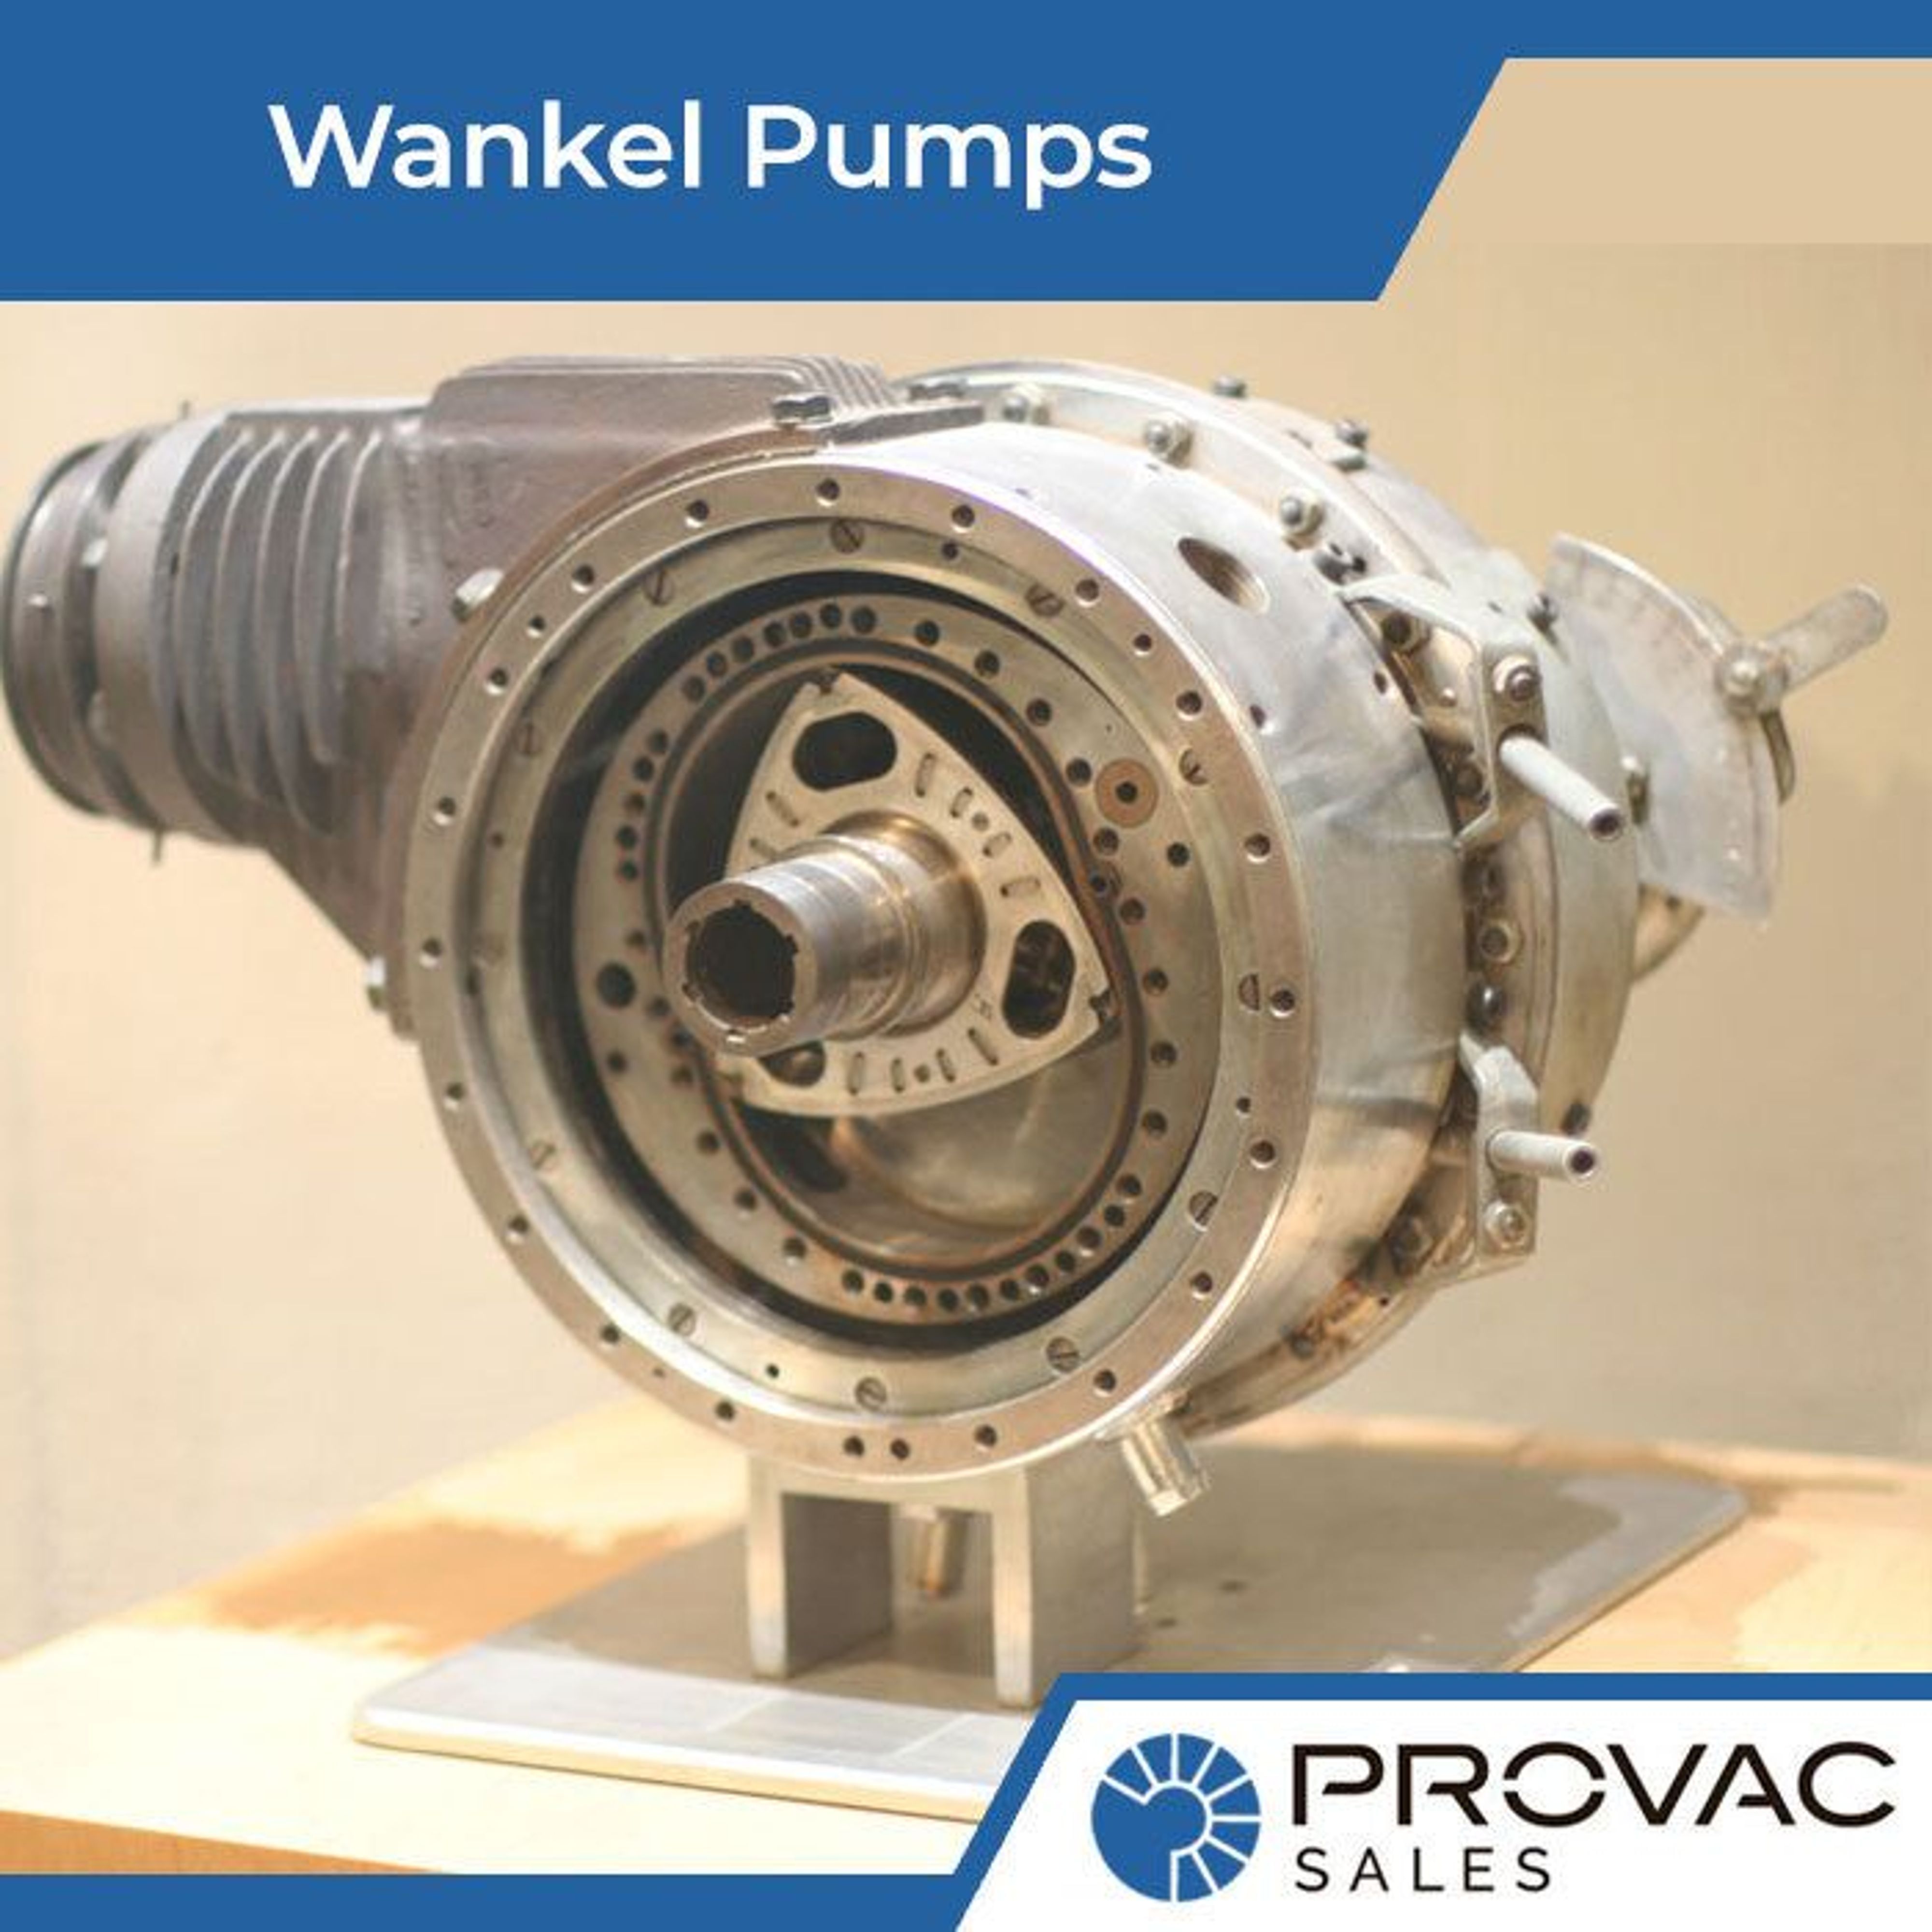 What is a Wankel Pump? Background